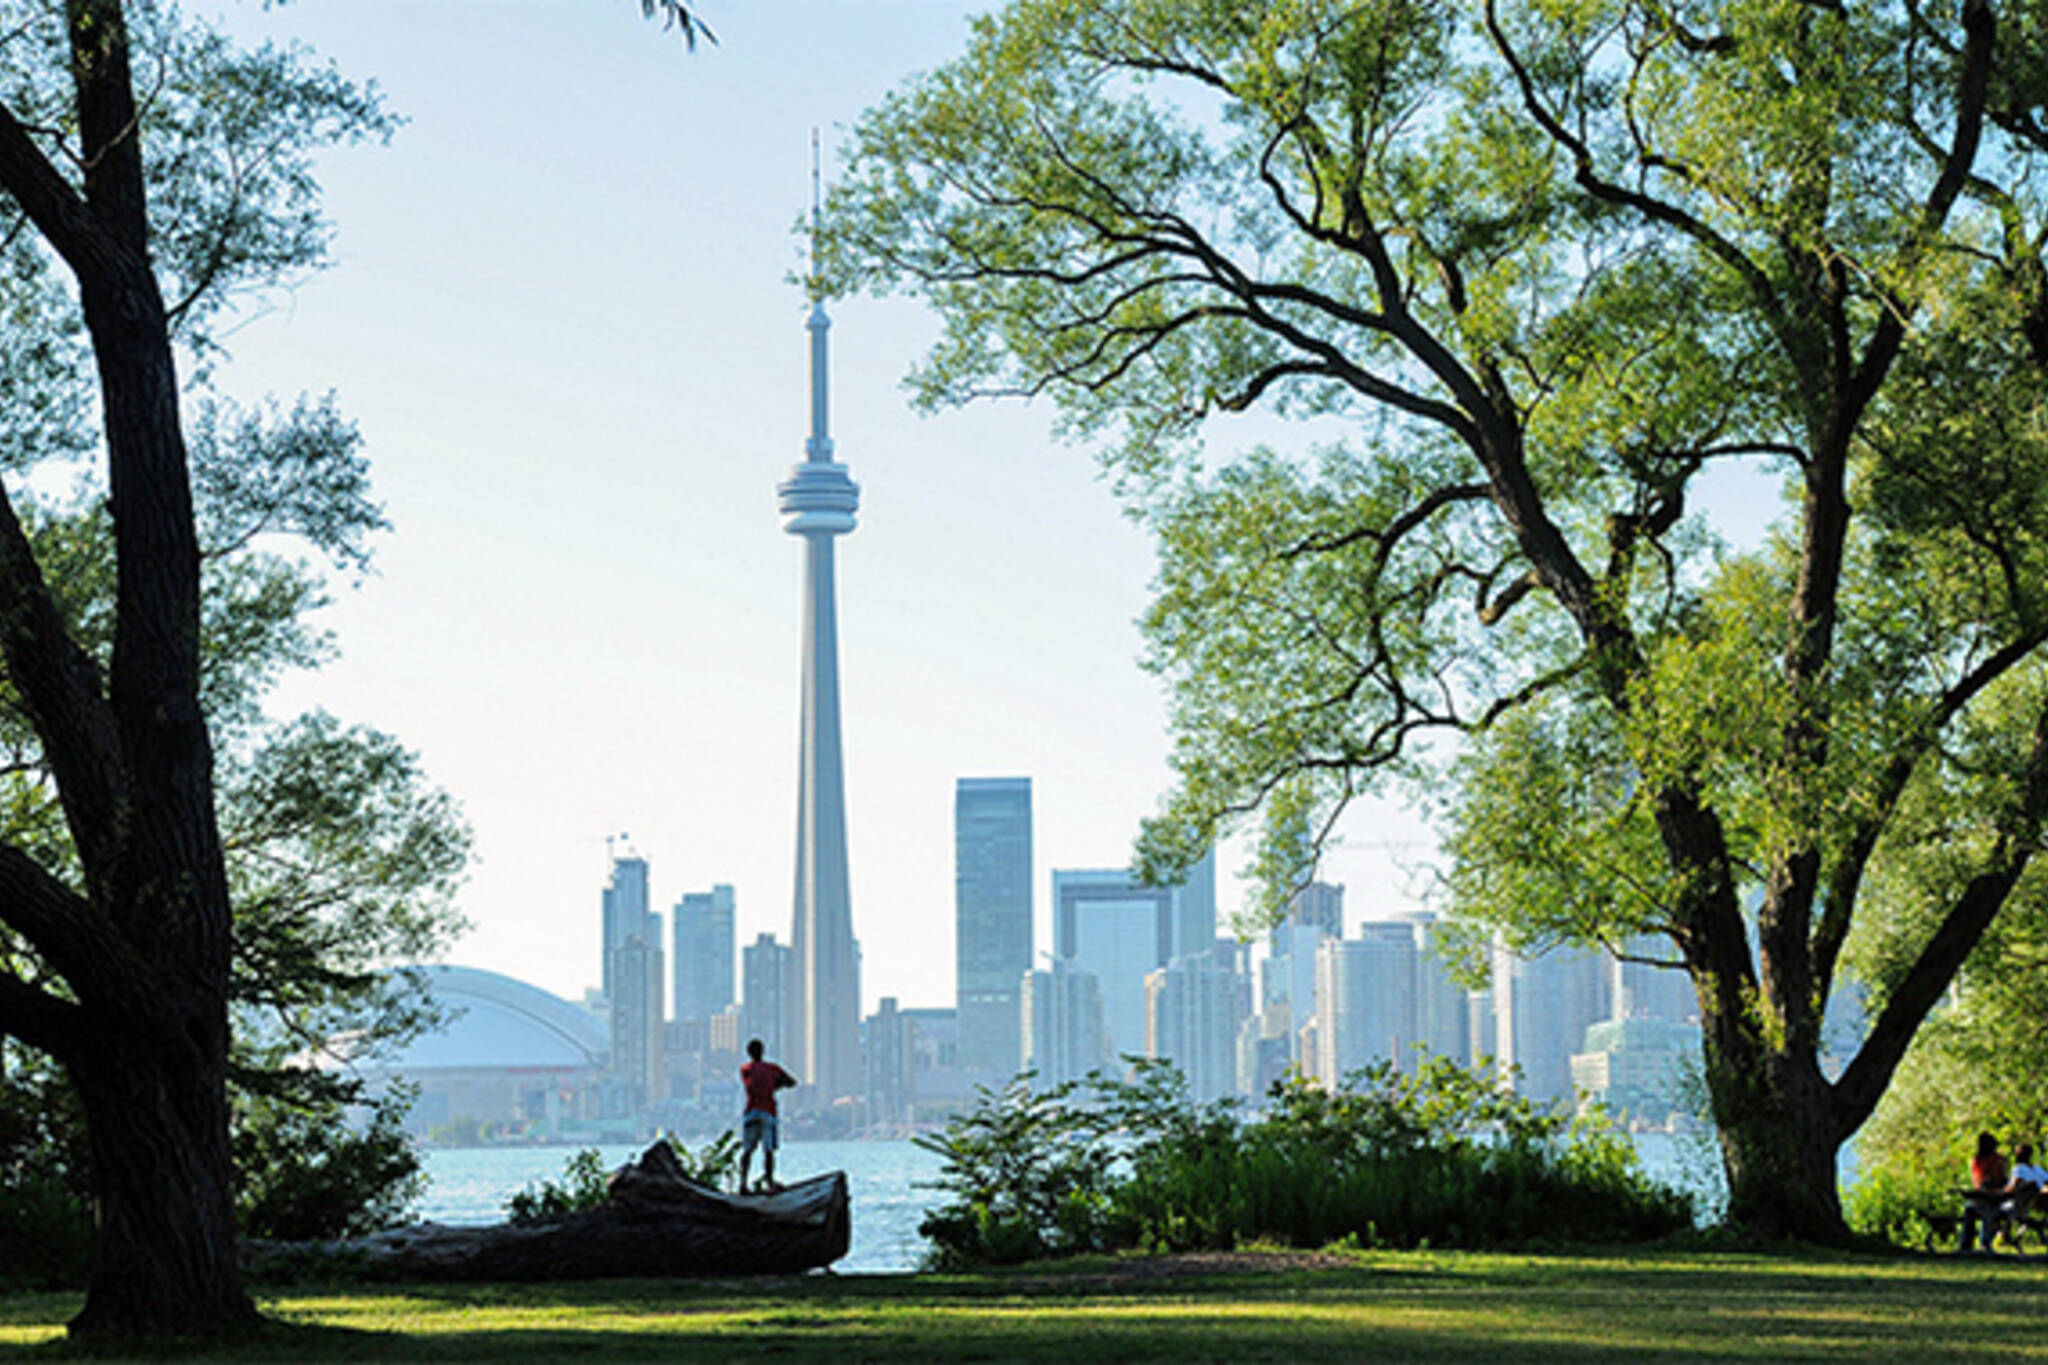 A love letter to the Toronto Islands